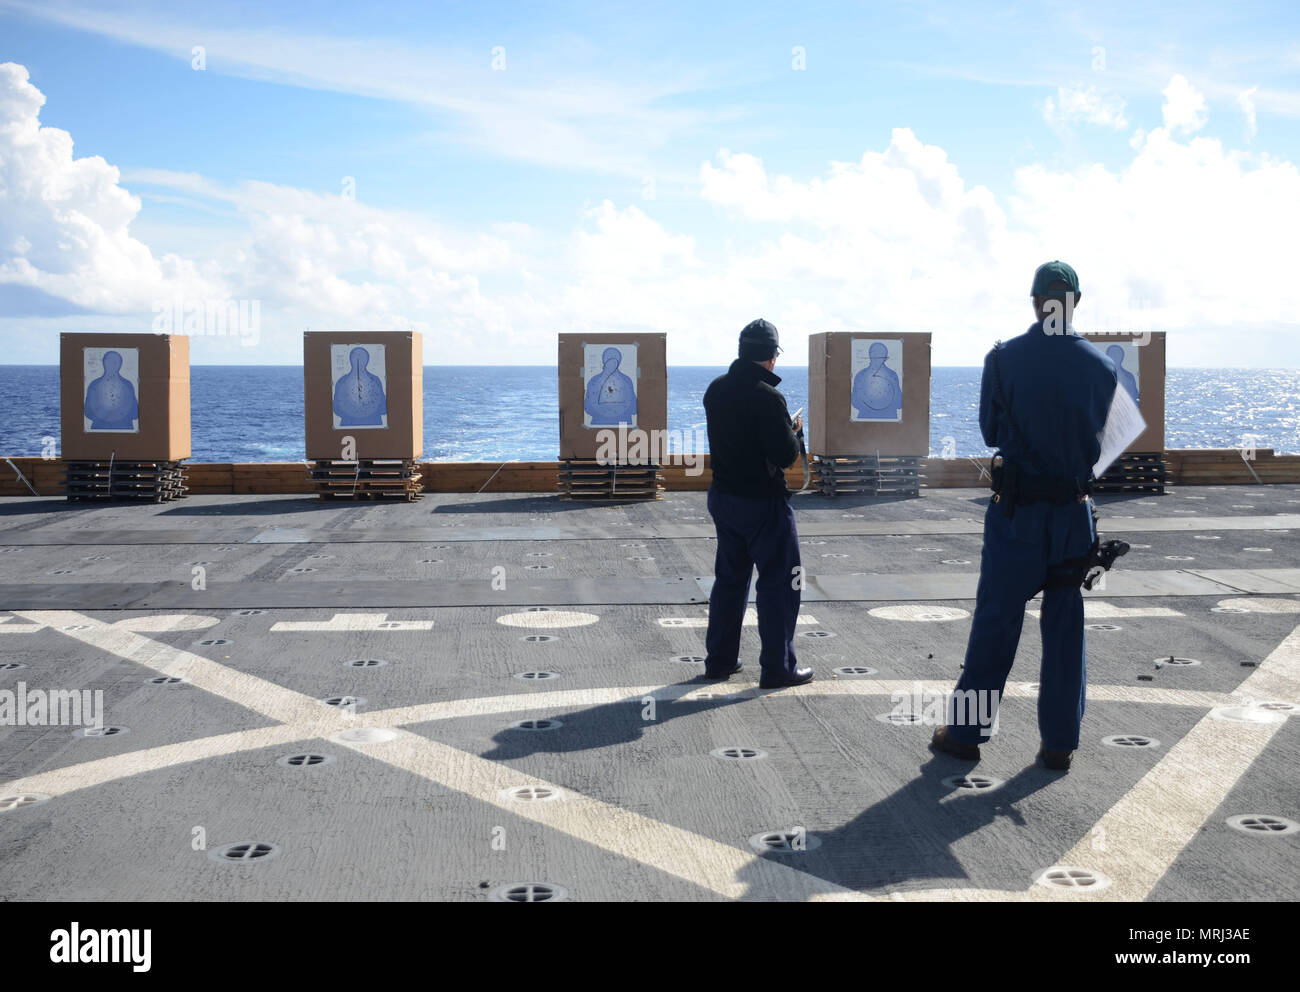 170621-N-WJ640-055 PACIFIC OCEAN (June 21, 2017) Civilian Mariners conduct live fire arms training onboard the flight deck of USNS Sacagawea (T-AKE 2) during Koa Moana 17, June 21. The Koa Moana 17 (Ocean Warrior) exercise is designed to improve interoperability; enhance military-to-military relations and expose Marine Corps forces to different types of terrain for familiarity in the event of a natural disaster or crisis in the region. (U.S. Navy photo by Mass Communication Specialist 3rd Class Madailein Abbott) Stock Photo